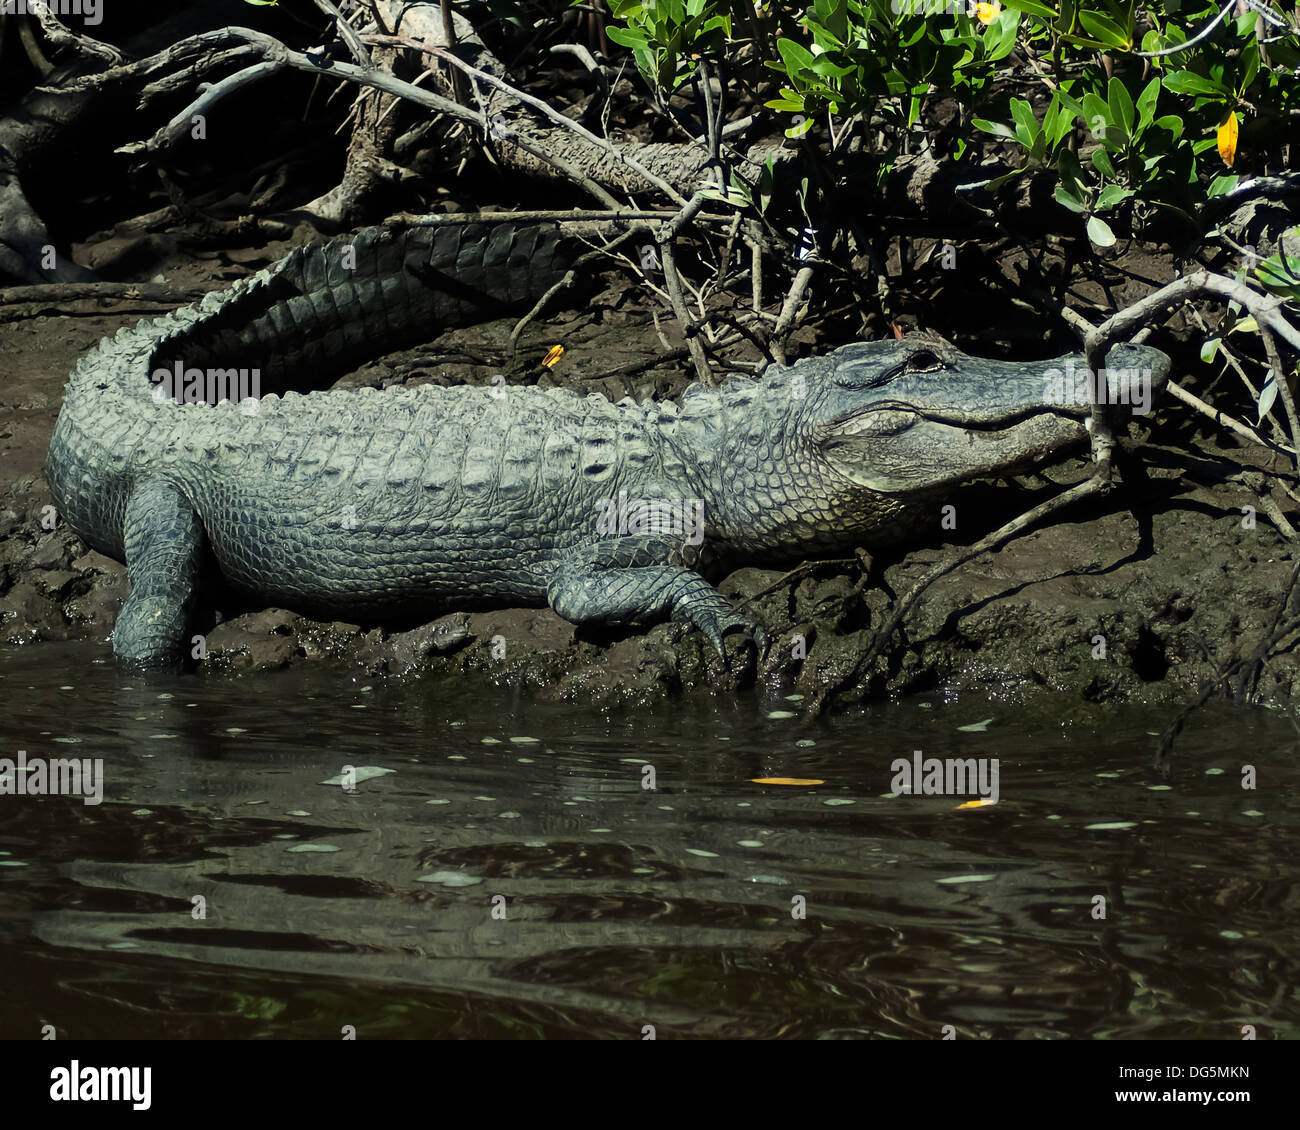 An alligator sitting on the shore of the swamp Stock Photo